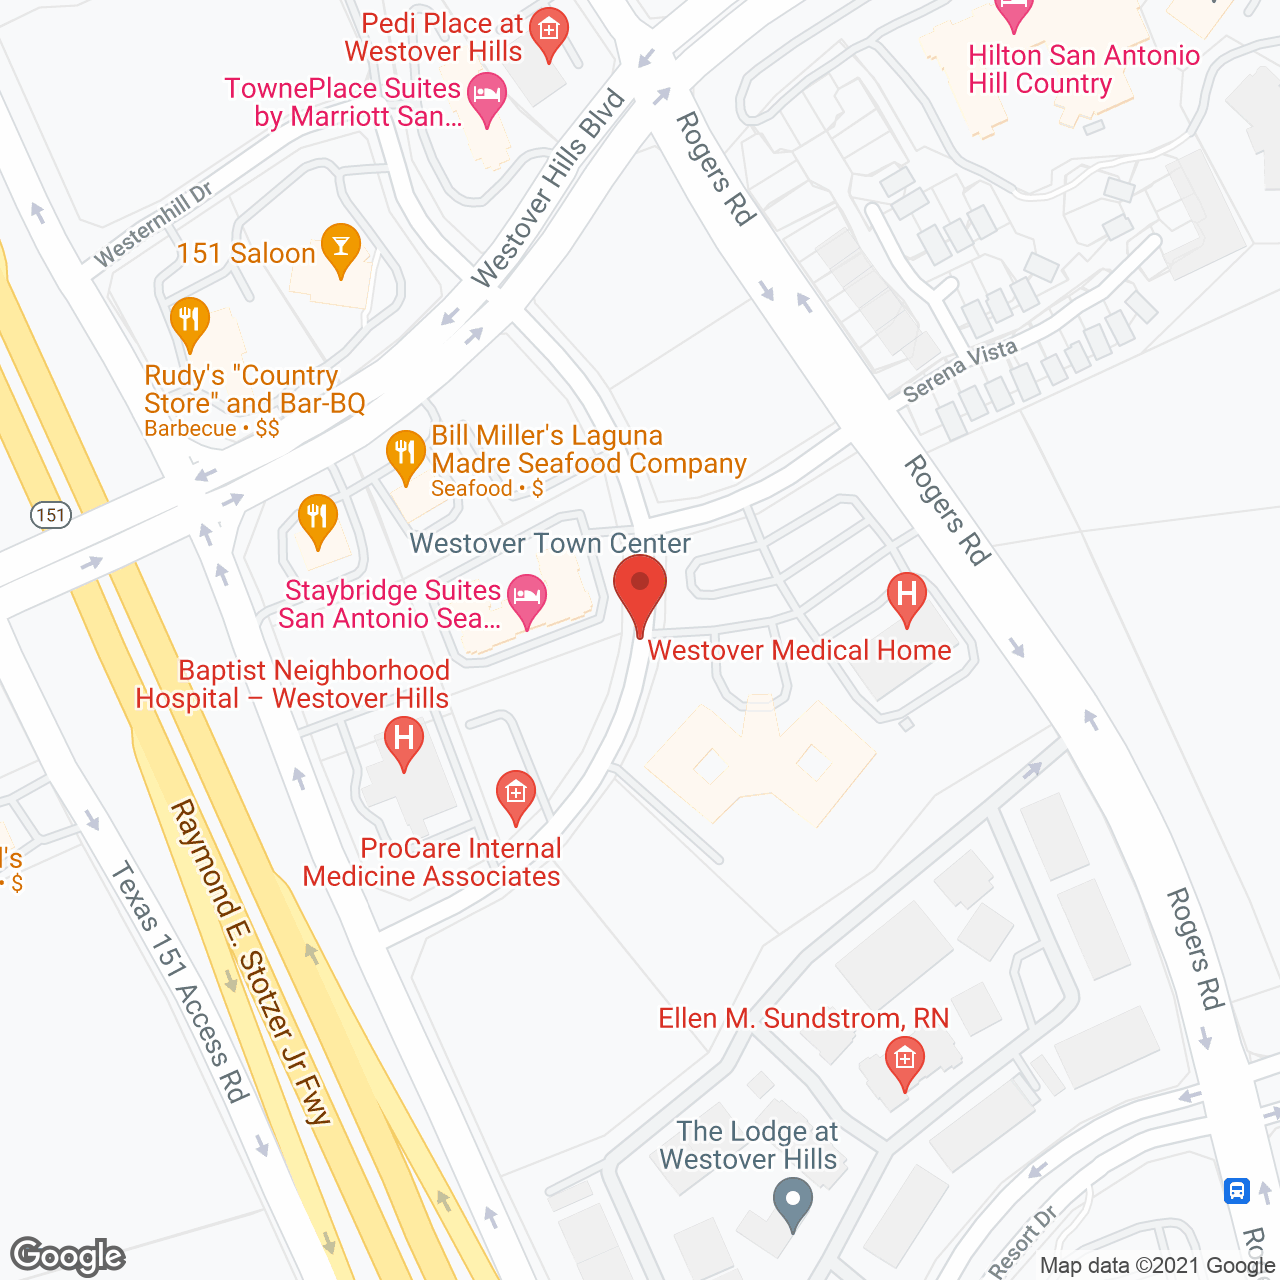 Chapters Living of San Antonio in google map